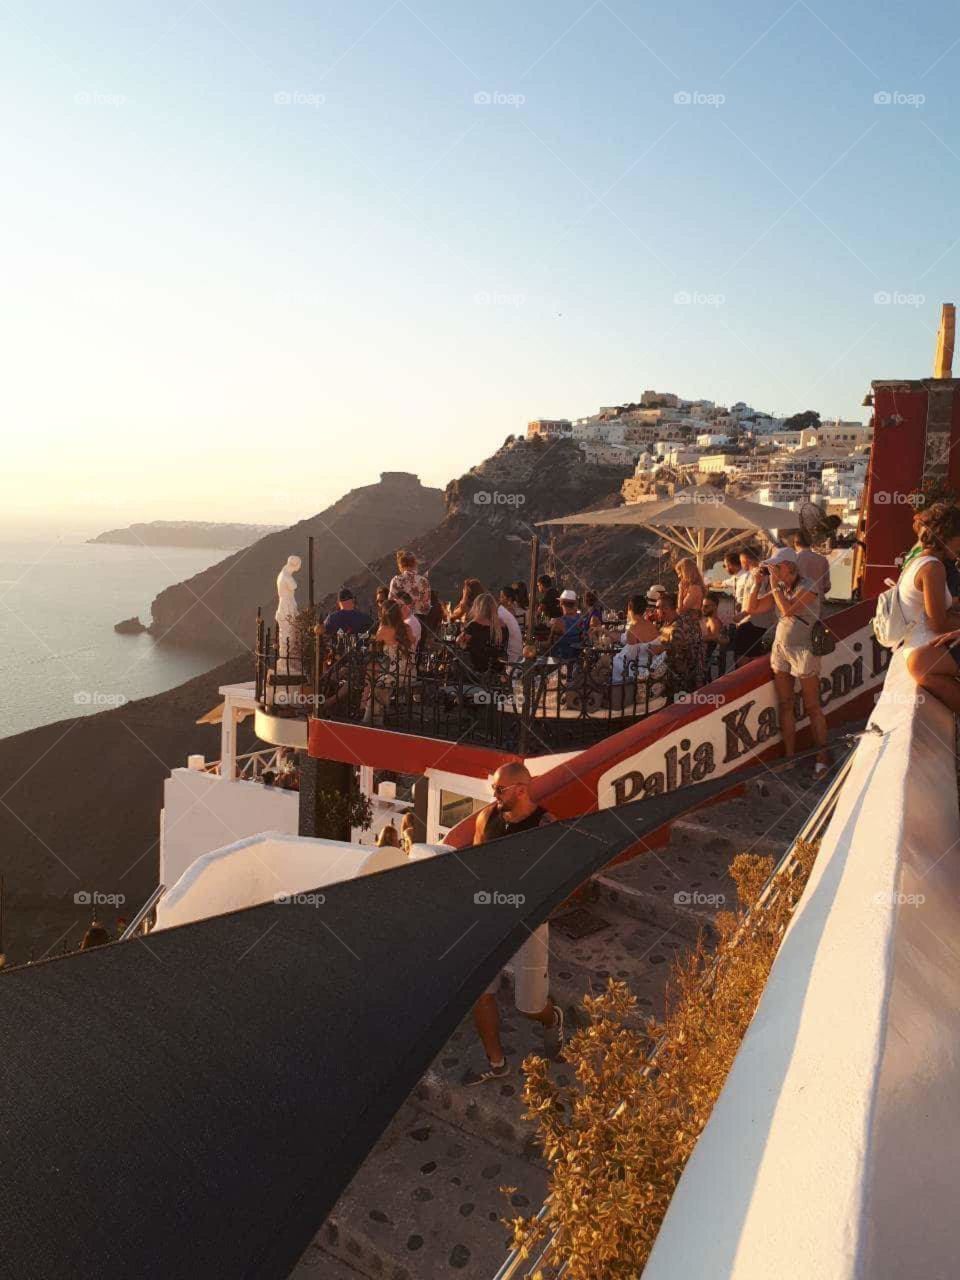 People  taking photographs and having fun at the beautiful island of Santorini. 
Amazing view of the sea. 
Careless times of vacation.